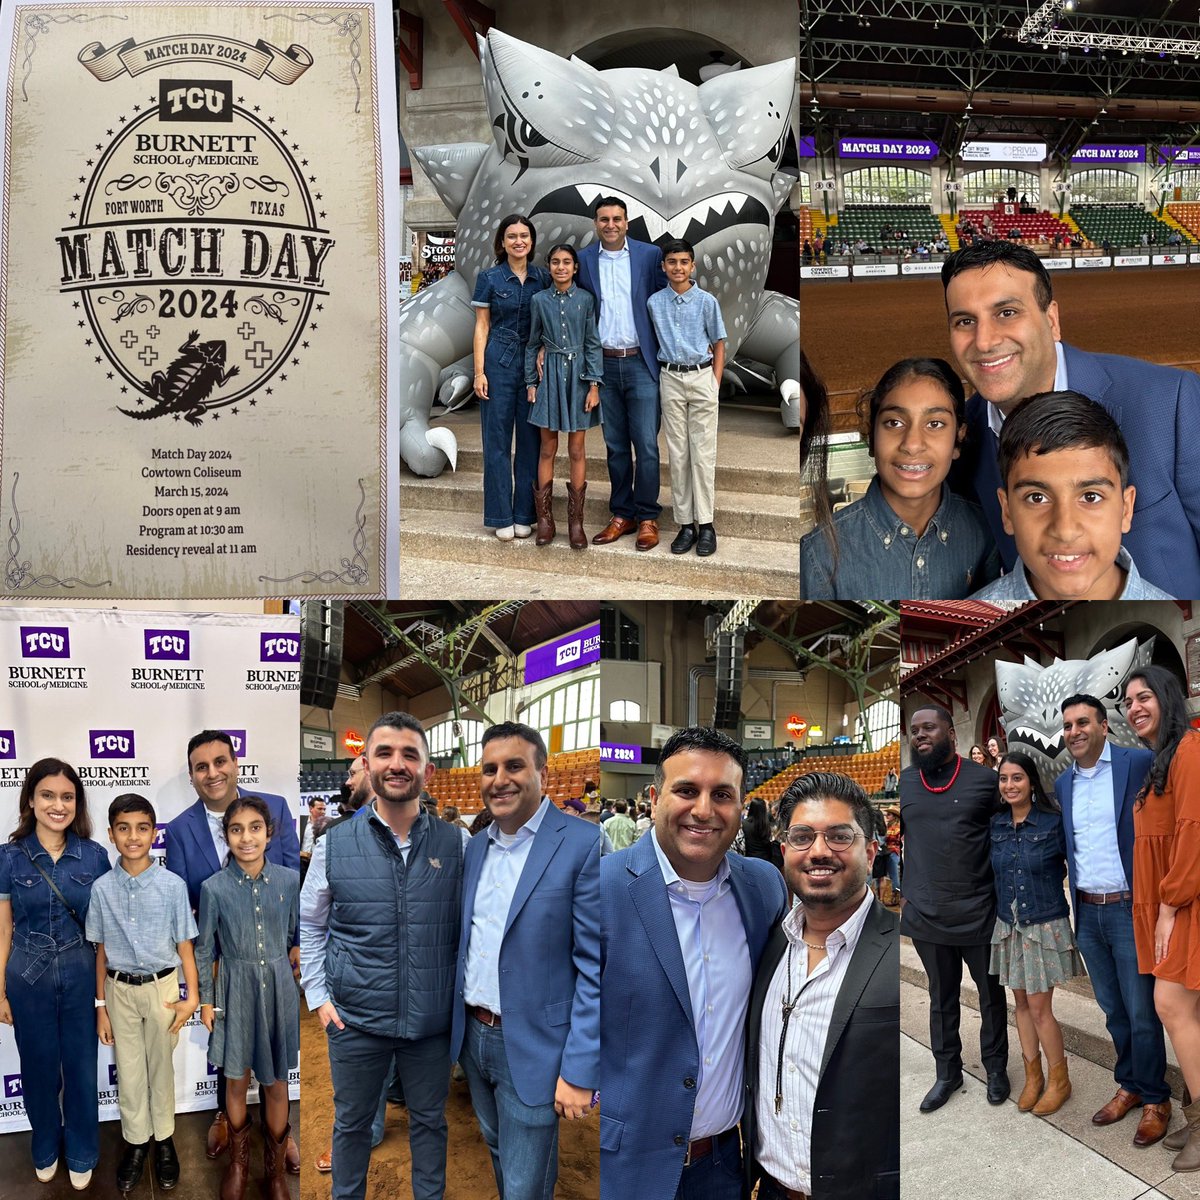 Had a great time at @TCUBurnettMed match day celebration with family! It was an honor to coach these amazing medical students over the last four years!  Wishing them all the best! @TCU @TCUMagazine #Match2024 #MatchDay2024